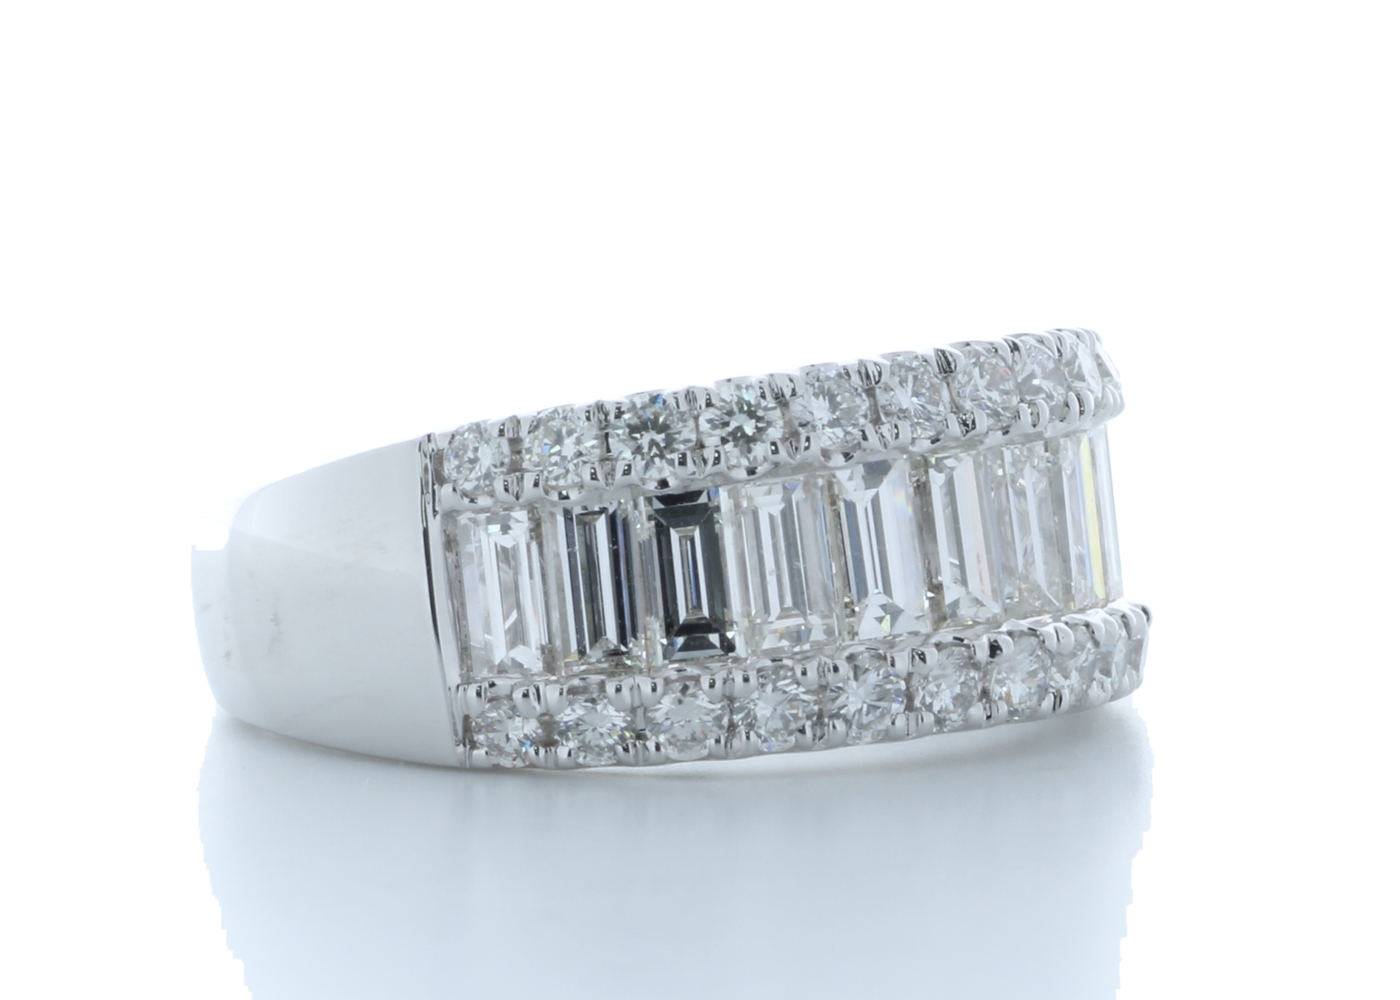 18ct White Gold Channel Set Semi Eternity Diamond Ring 2.34 Carats - Image 4 of 5